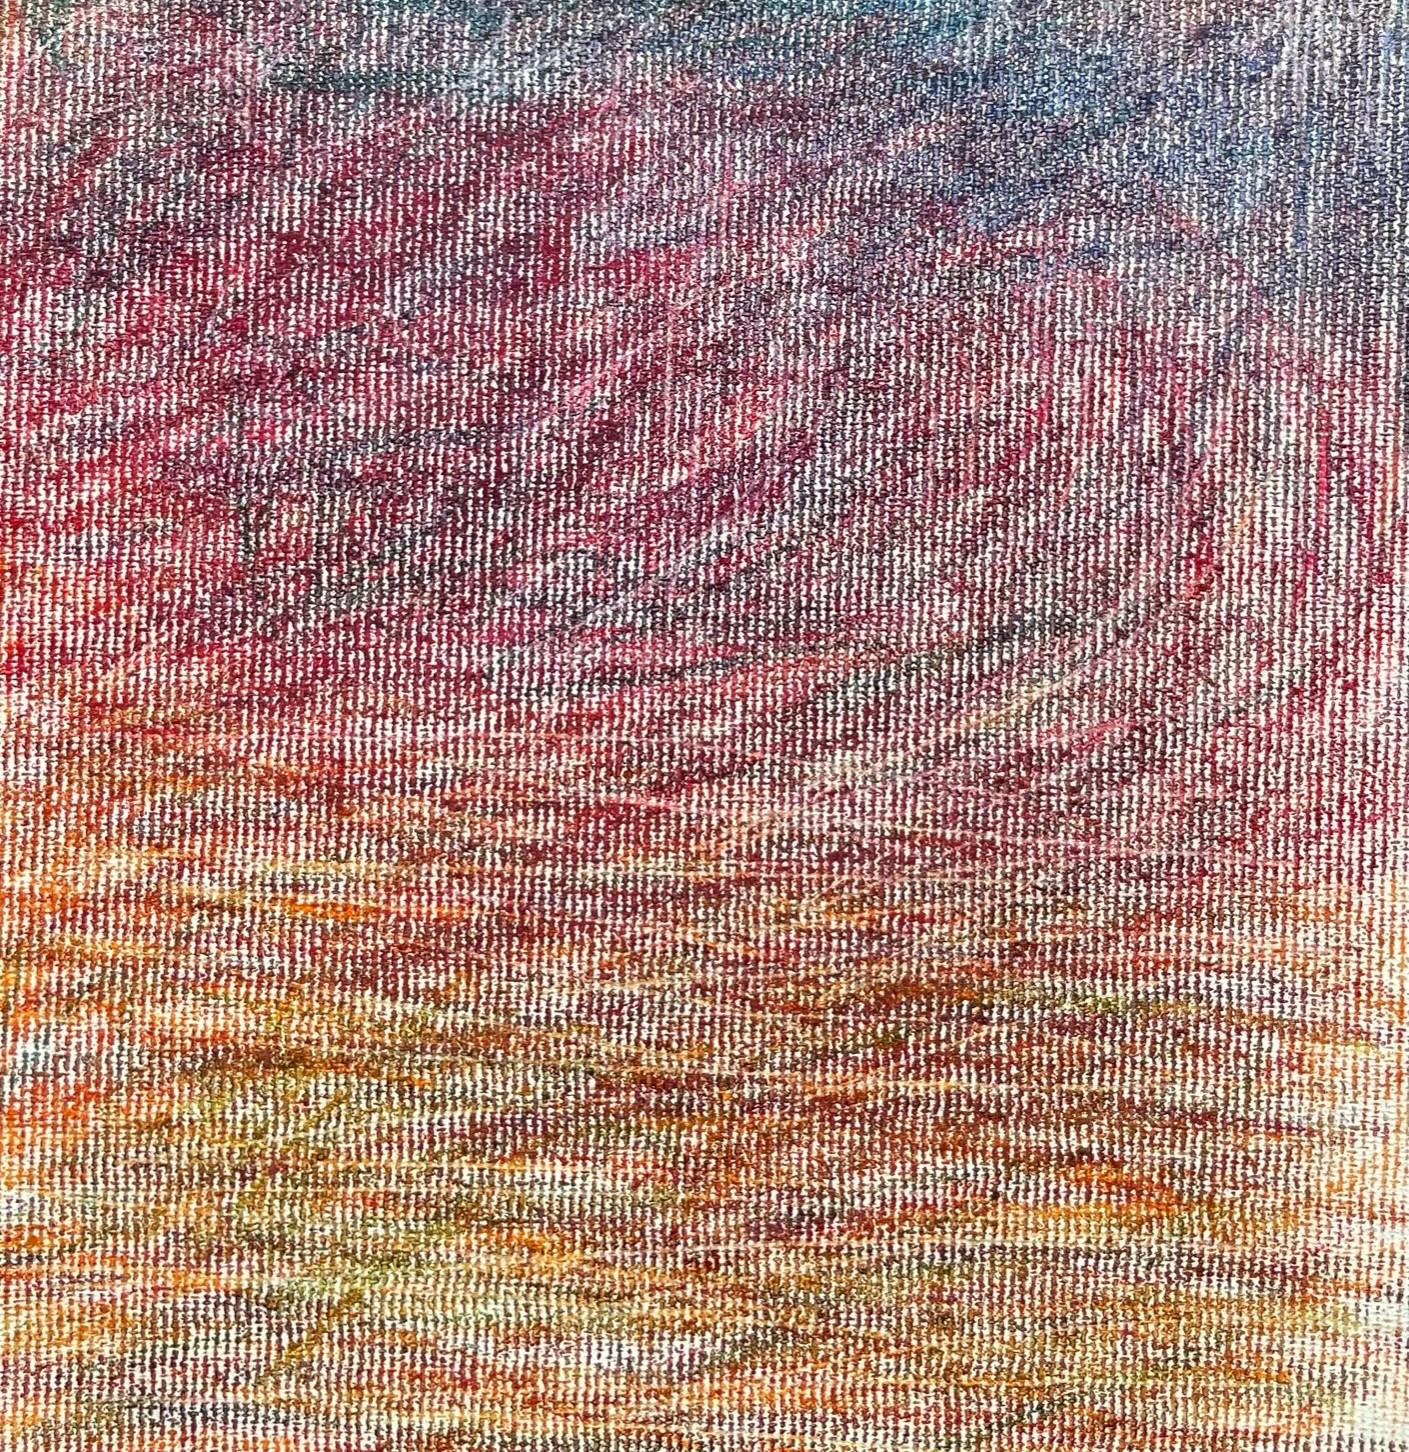 Body in the Field #9 - Landscape, Orange, Red, Coloured pencil  - Expressionist Art by Zsolt Berszán